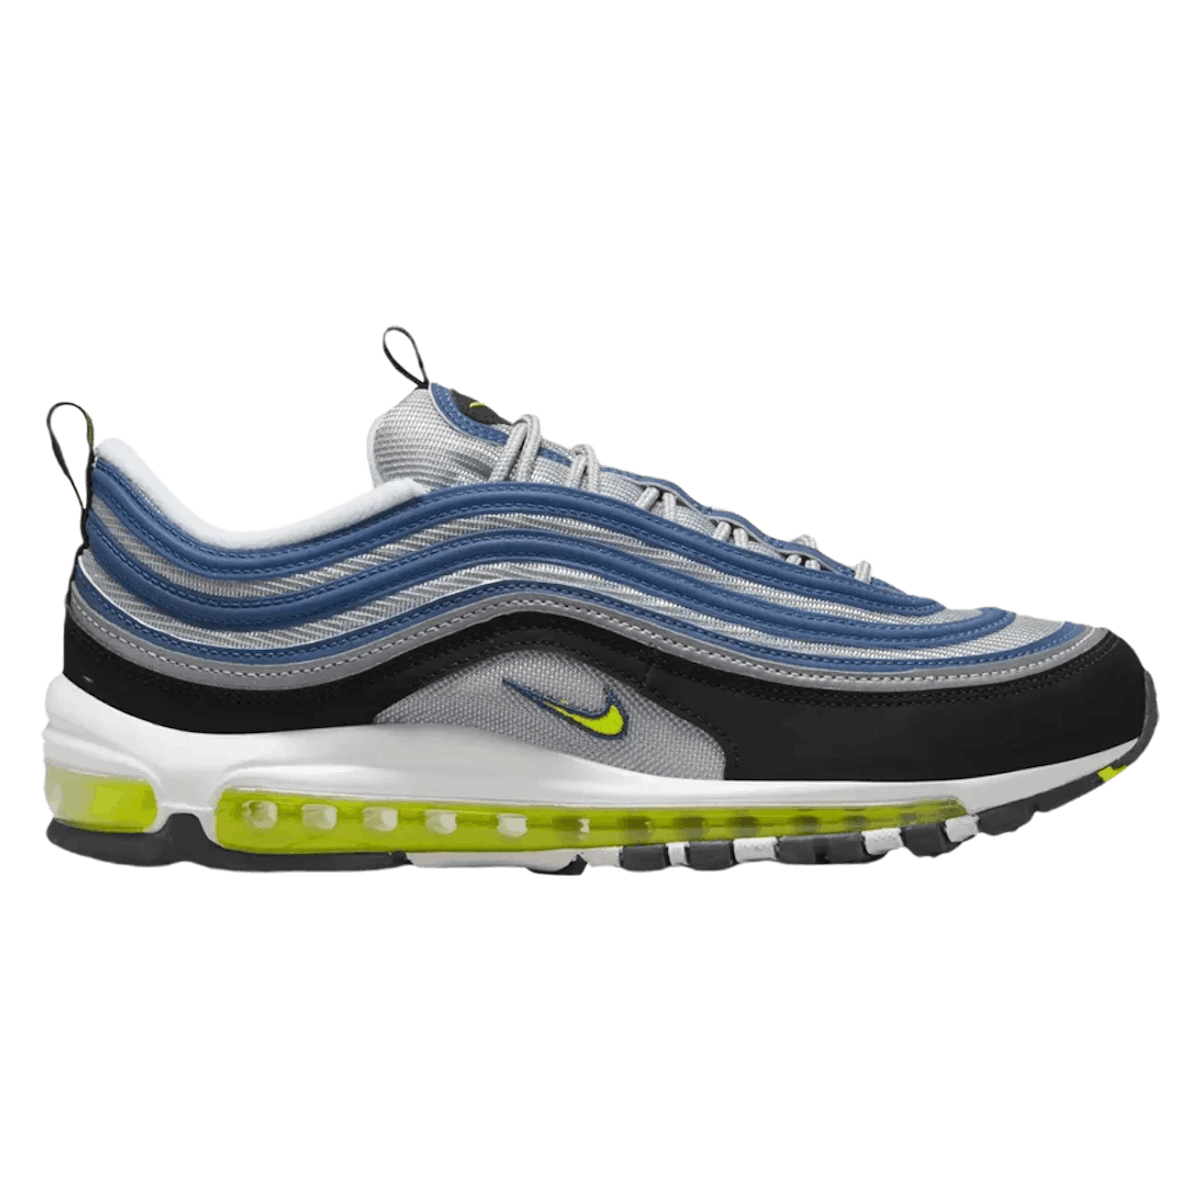 Nike Air Max 97 OG "Atlantic Blue and Voltage Yellow"